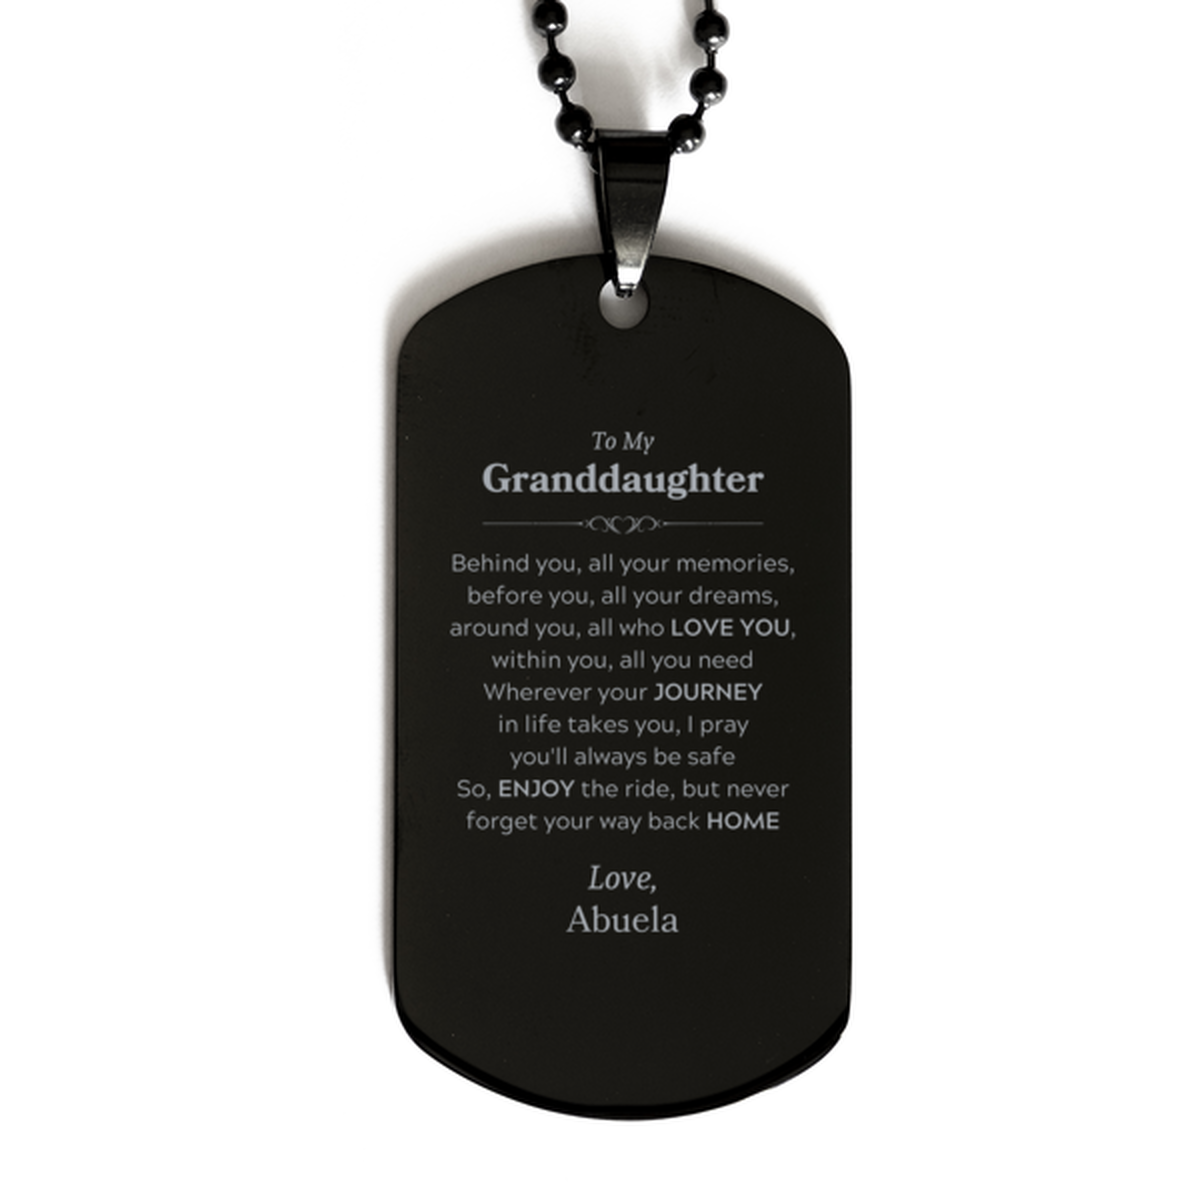 To My Granddaughter Graduation Gifts from Abuela, Granddaughter Black Dog Tag Christmas Birthday Gifts for Granddaughter Behind you, all your memories, before you, all your dreams. Love, Abuela